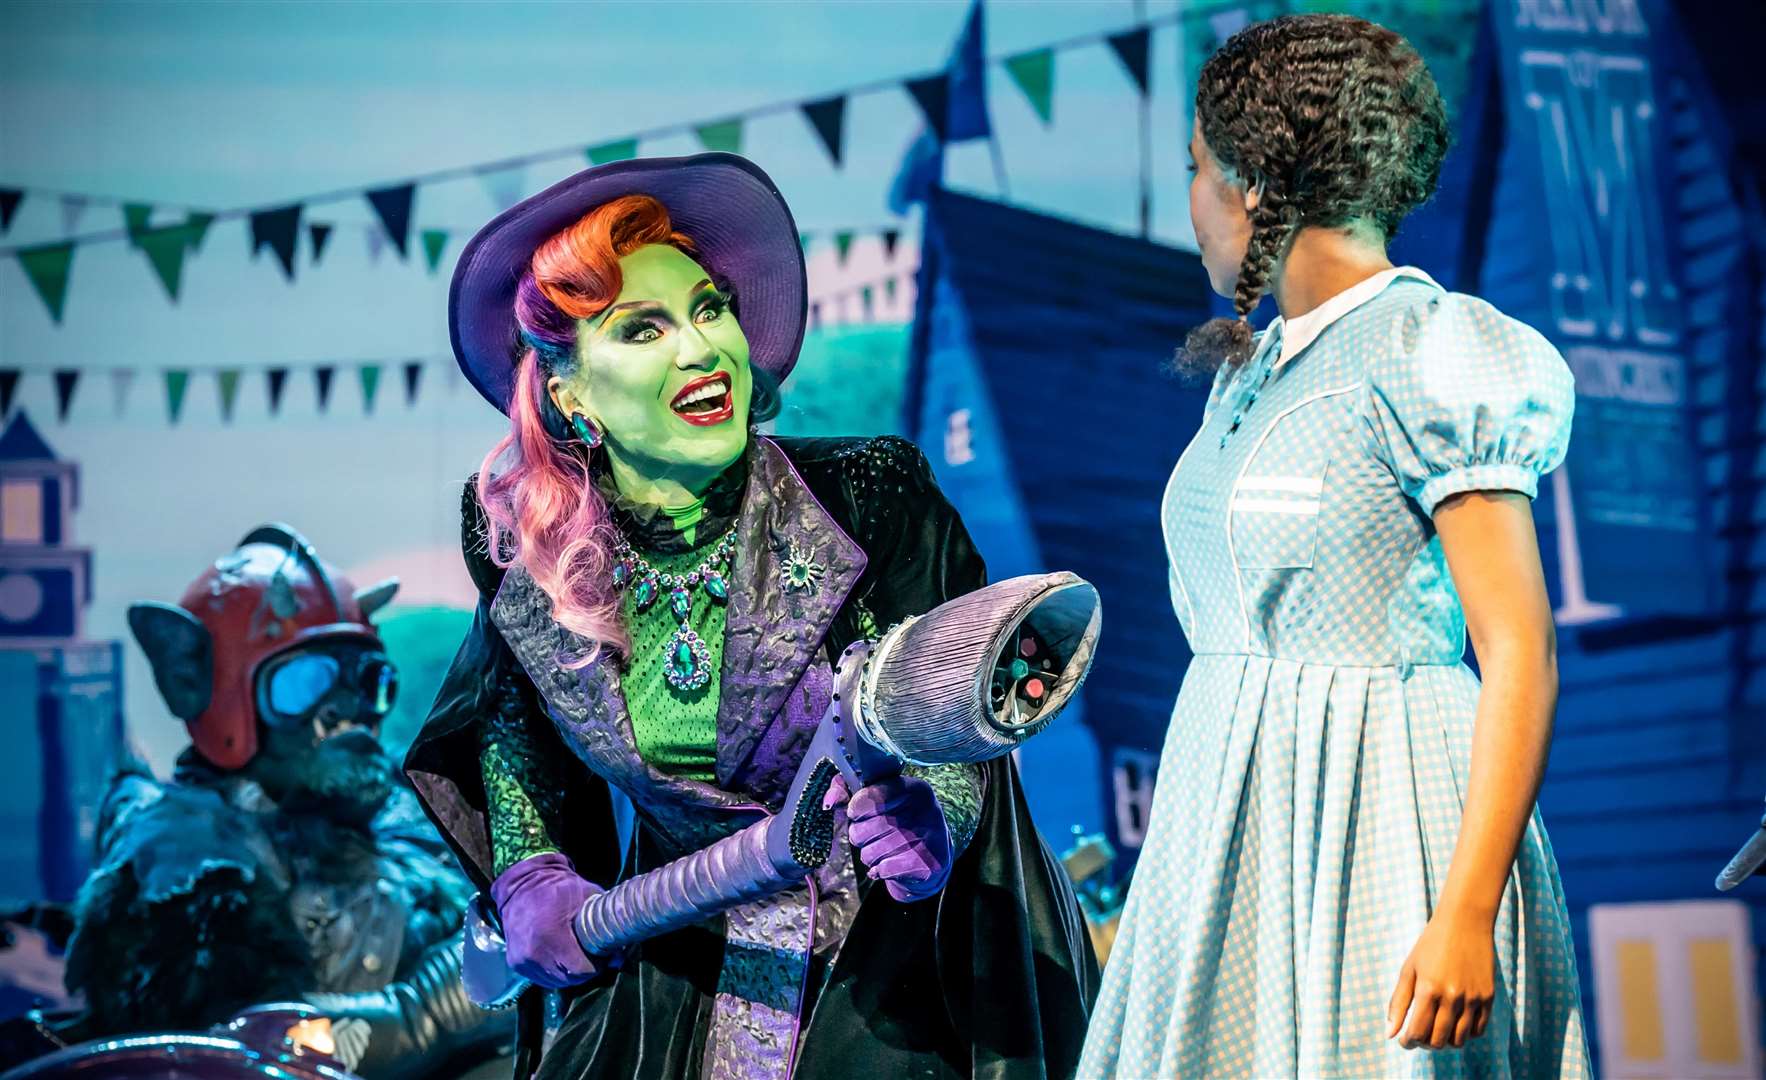 A new touring production of the Wizard of Oz has flown into the Marlowe Theatre in Canterbury. Picture: Marc Brenner